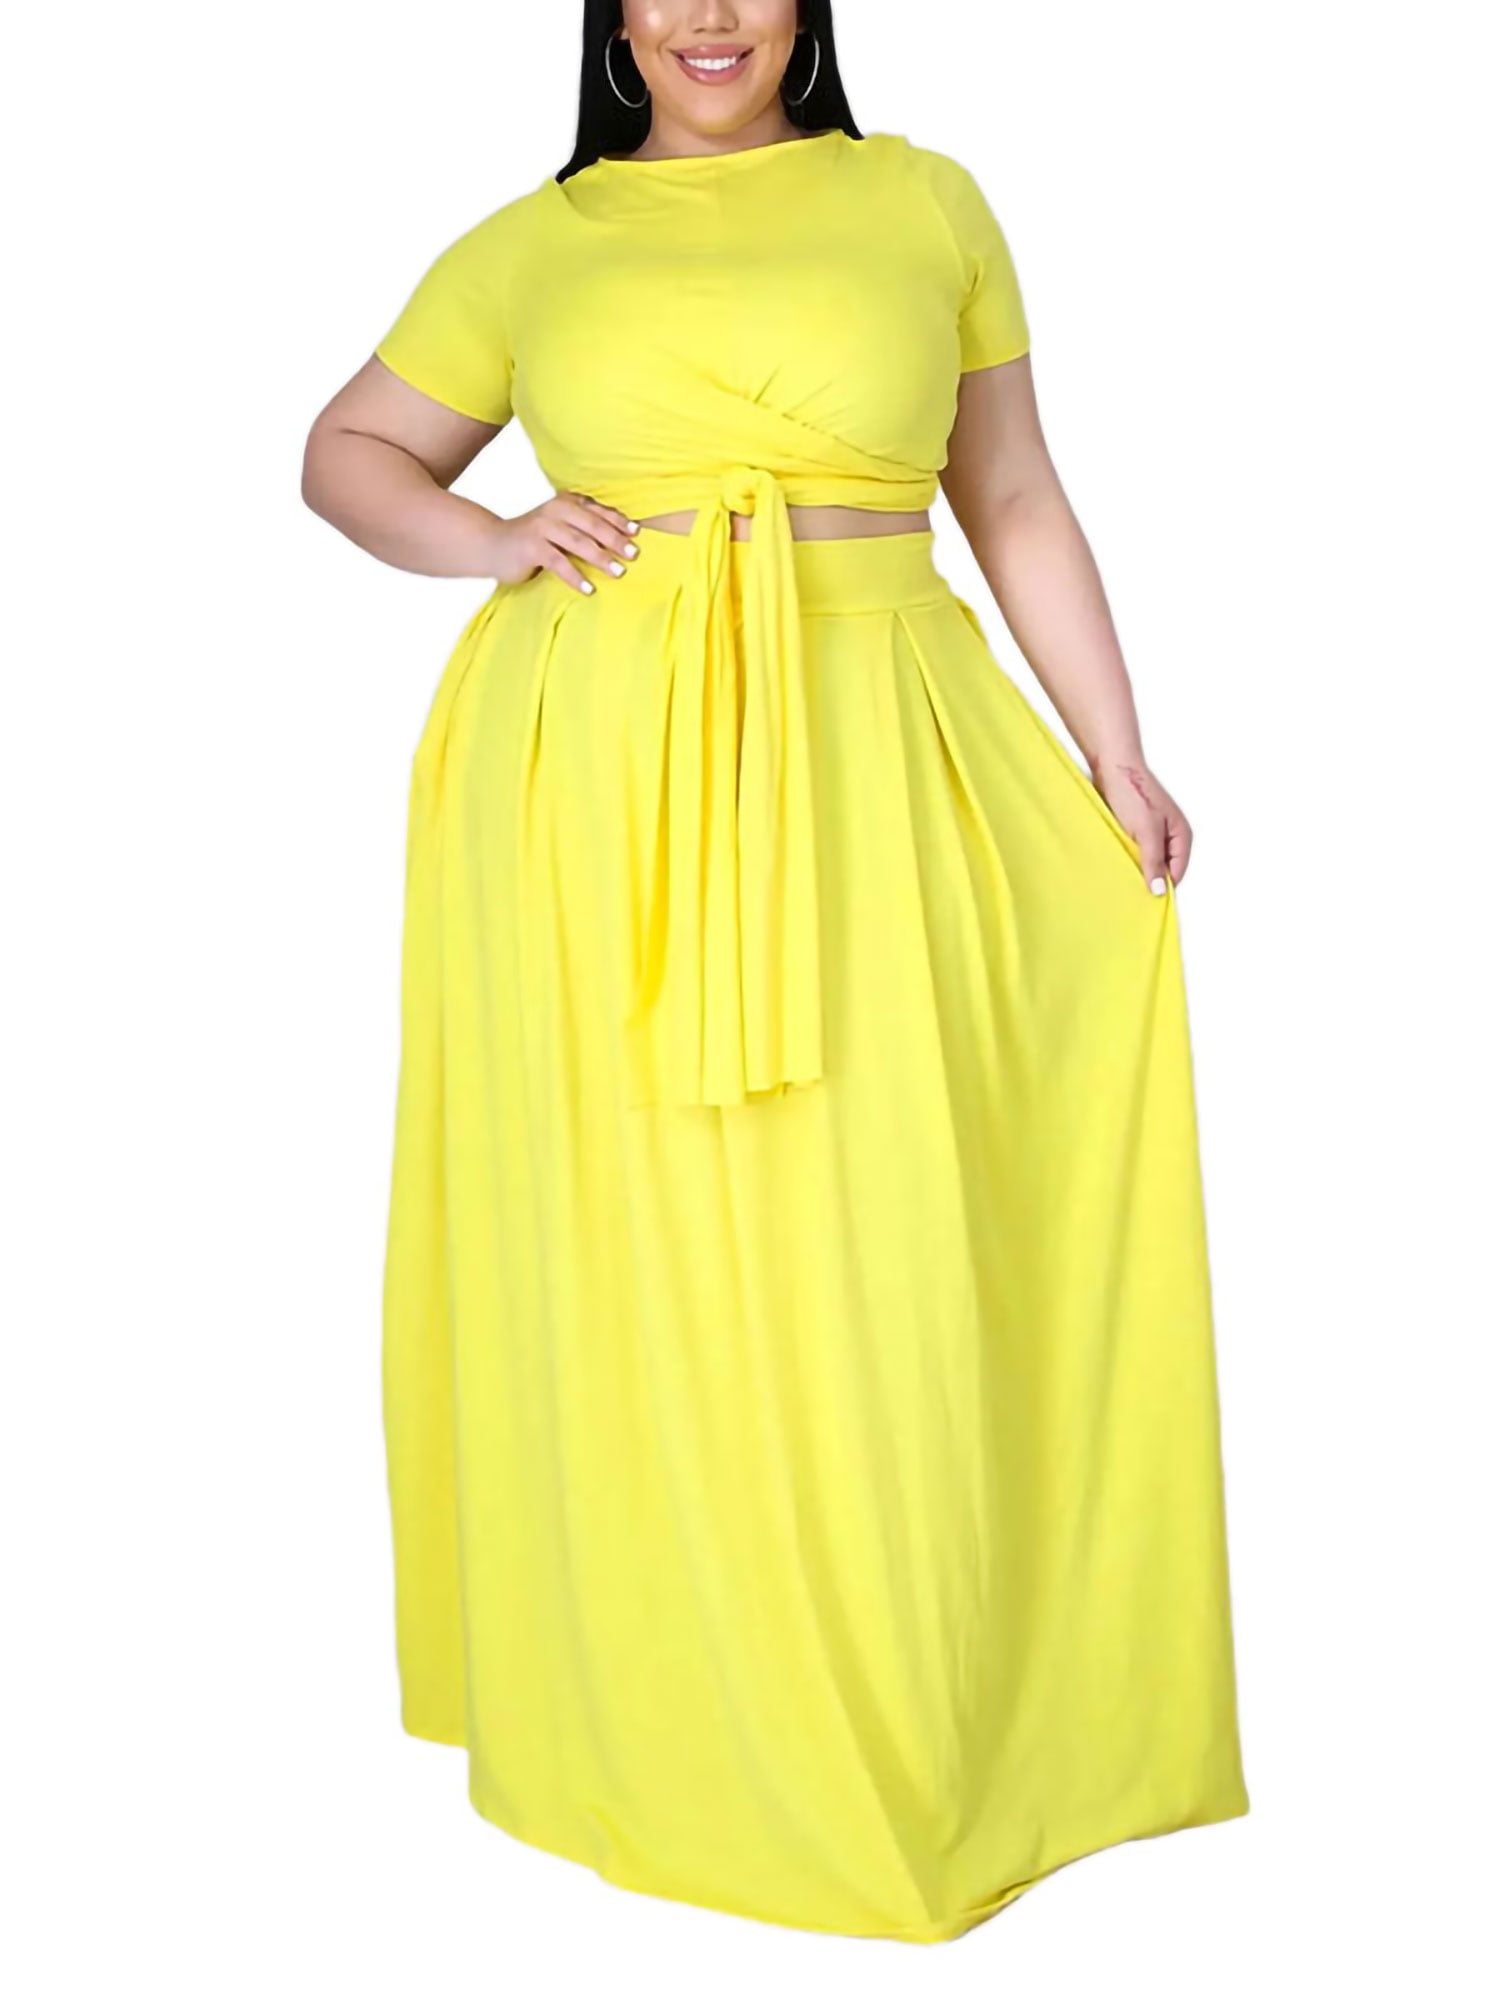 MAWCLOS Womens Plus Size 2 Piece Outfits Summer Solid Color Short Sleeve  Tops and Long Skirts Casual Sets for Beach Vacation 